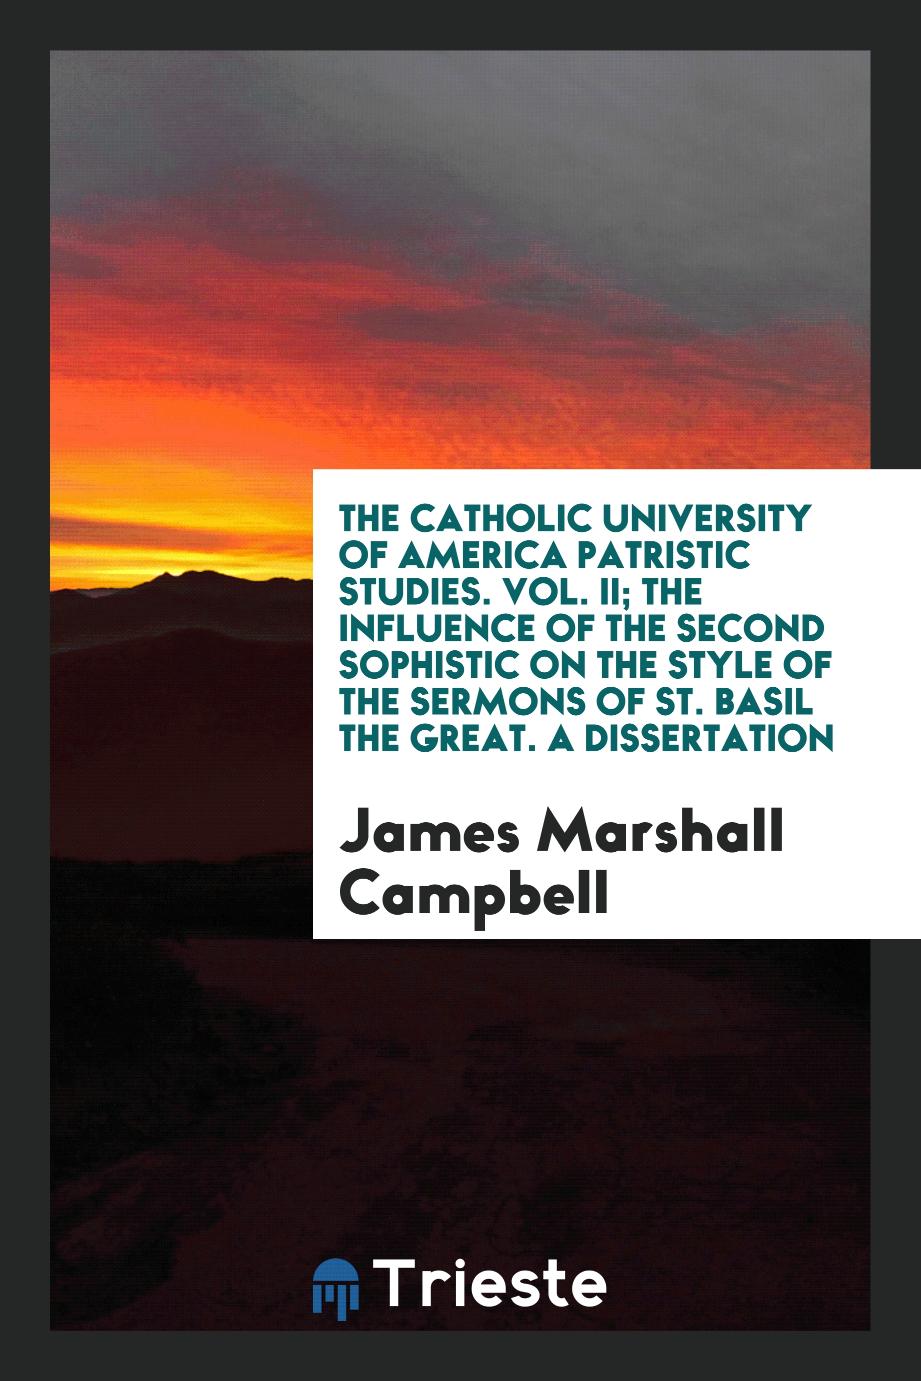 The Catholic University of America Patristic Studies. Vol. II; The Influence of the Second Sophistic on the Style of the Sermons of St. Basil the Great. A Dissertation